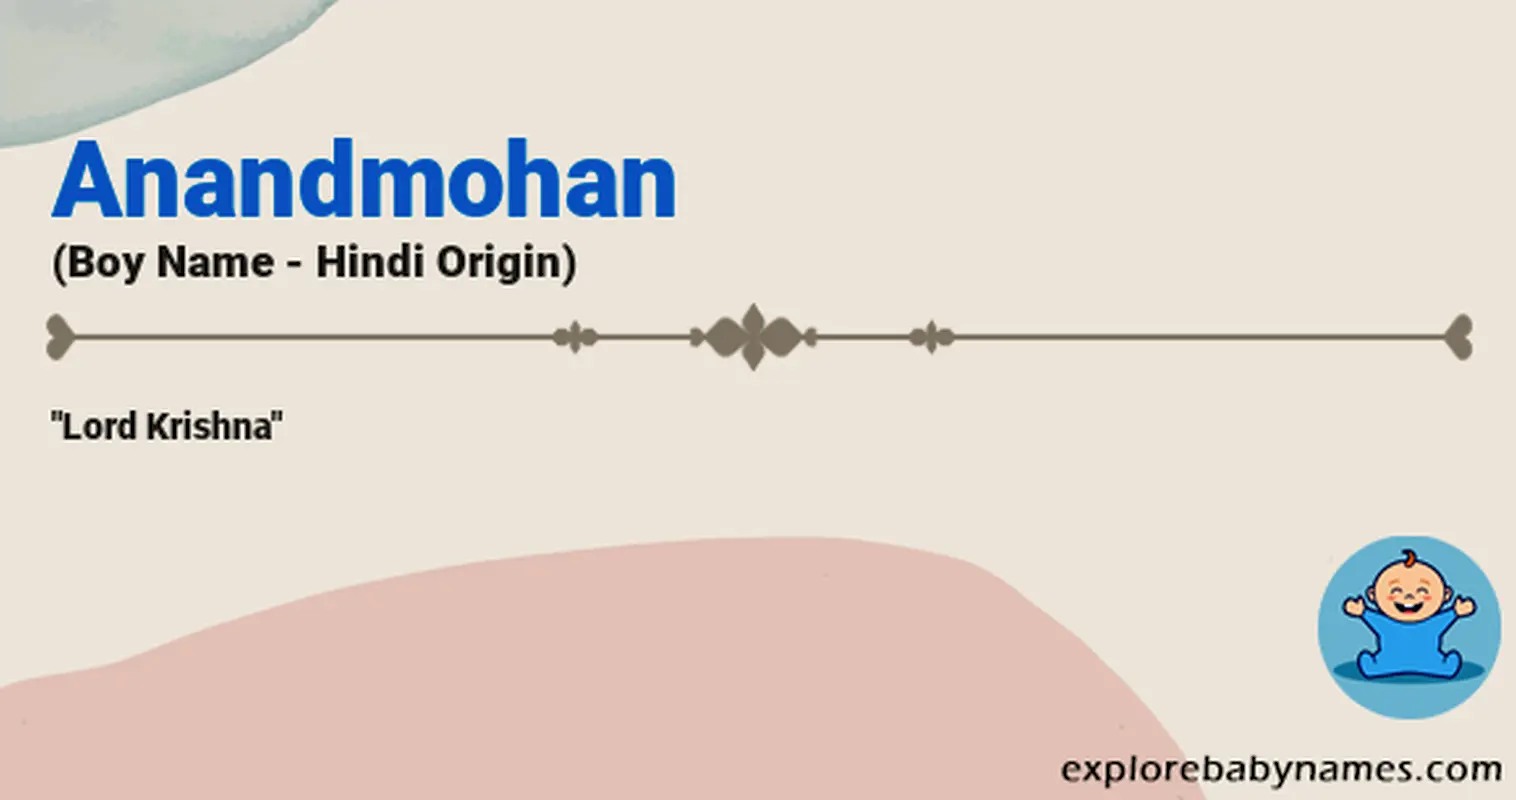 Meaning of Anandmohan